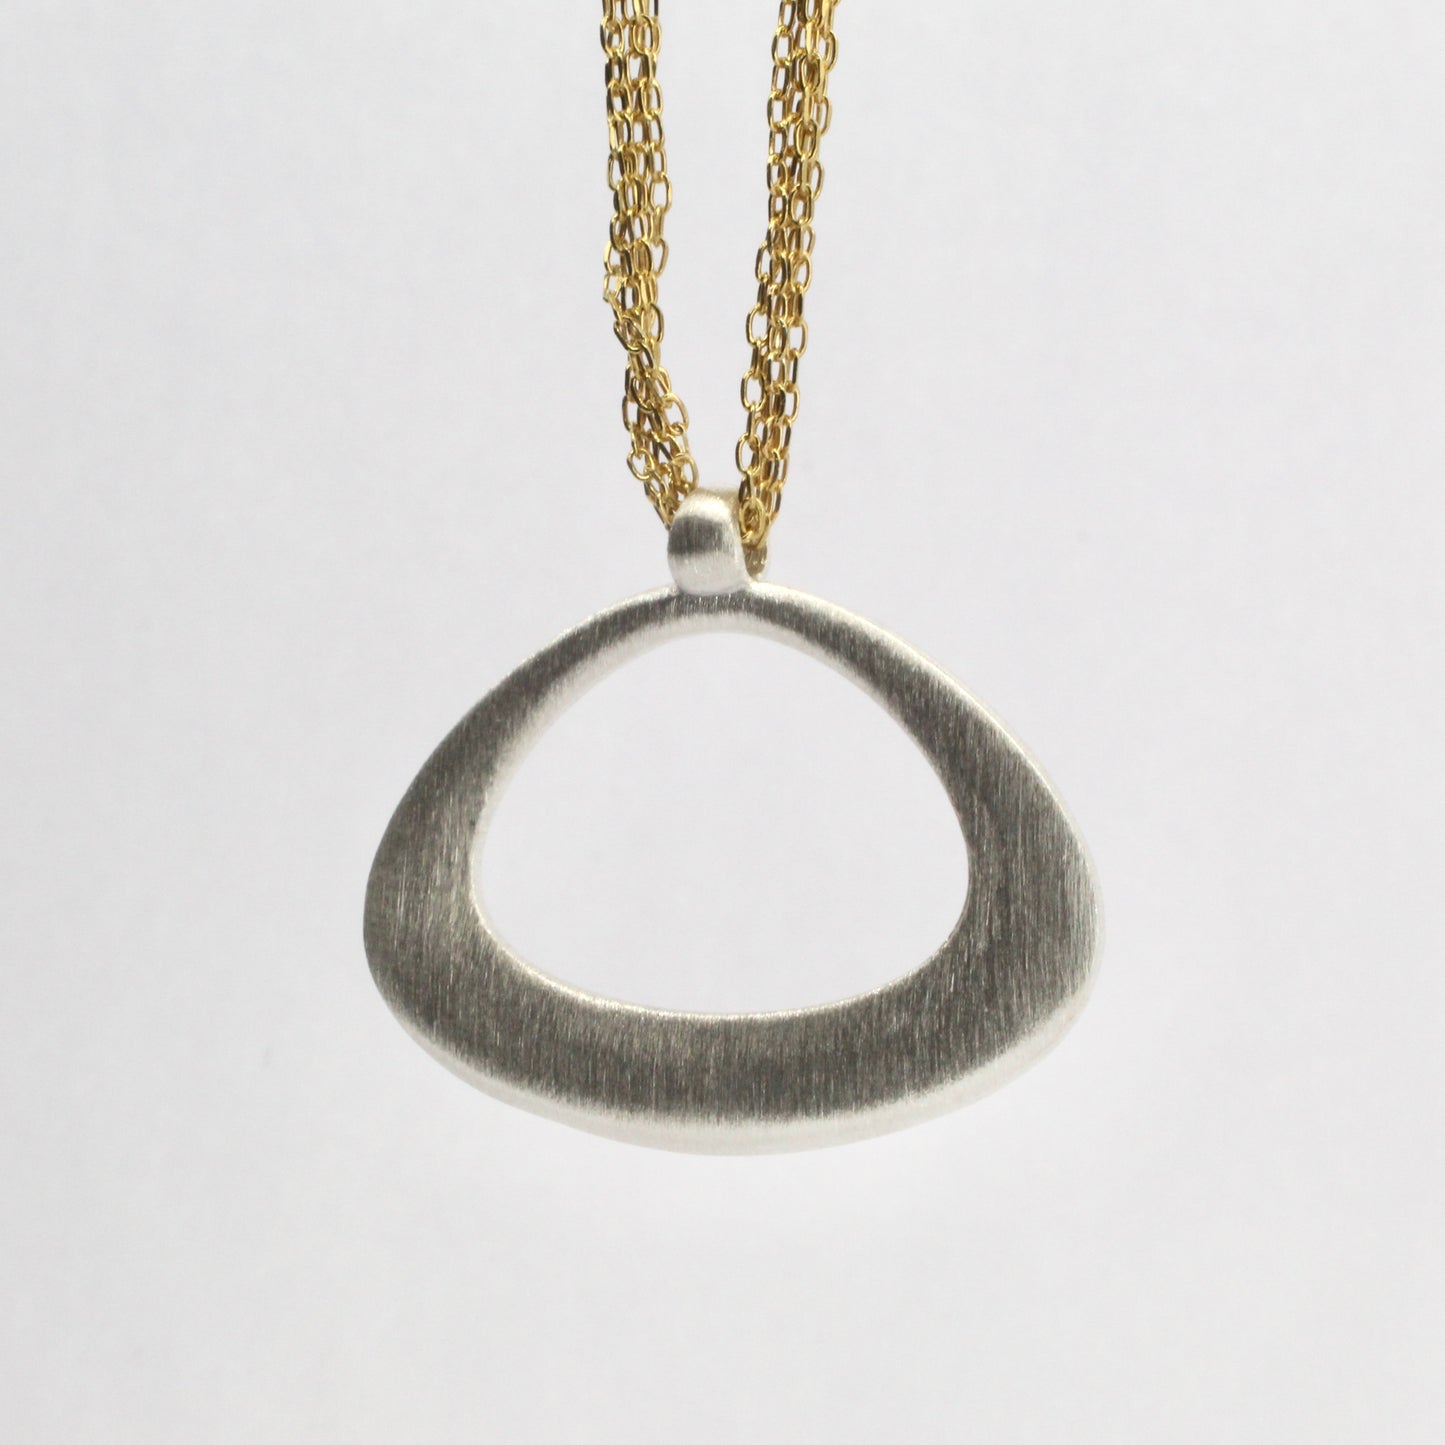 Silver and God Vermeil Necklace